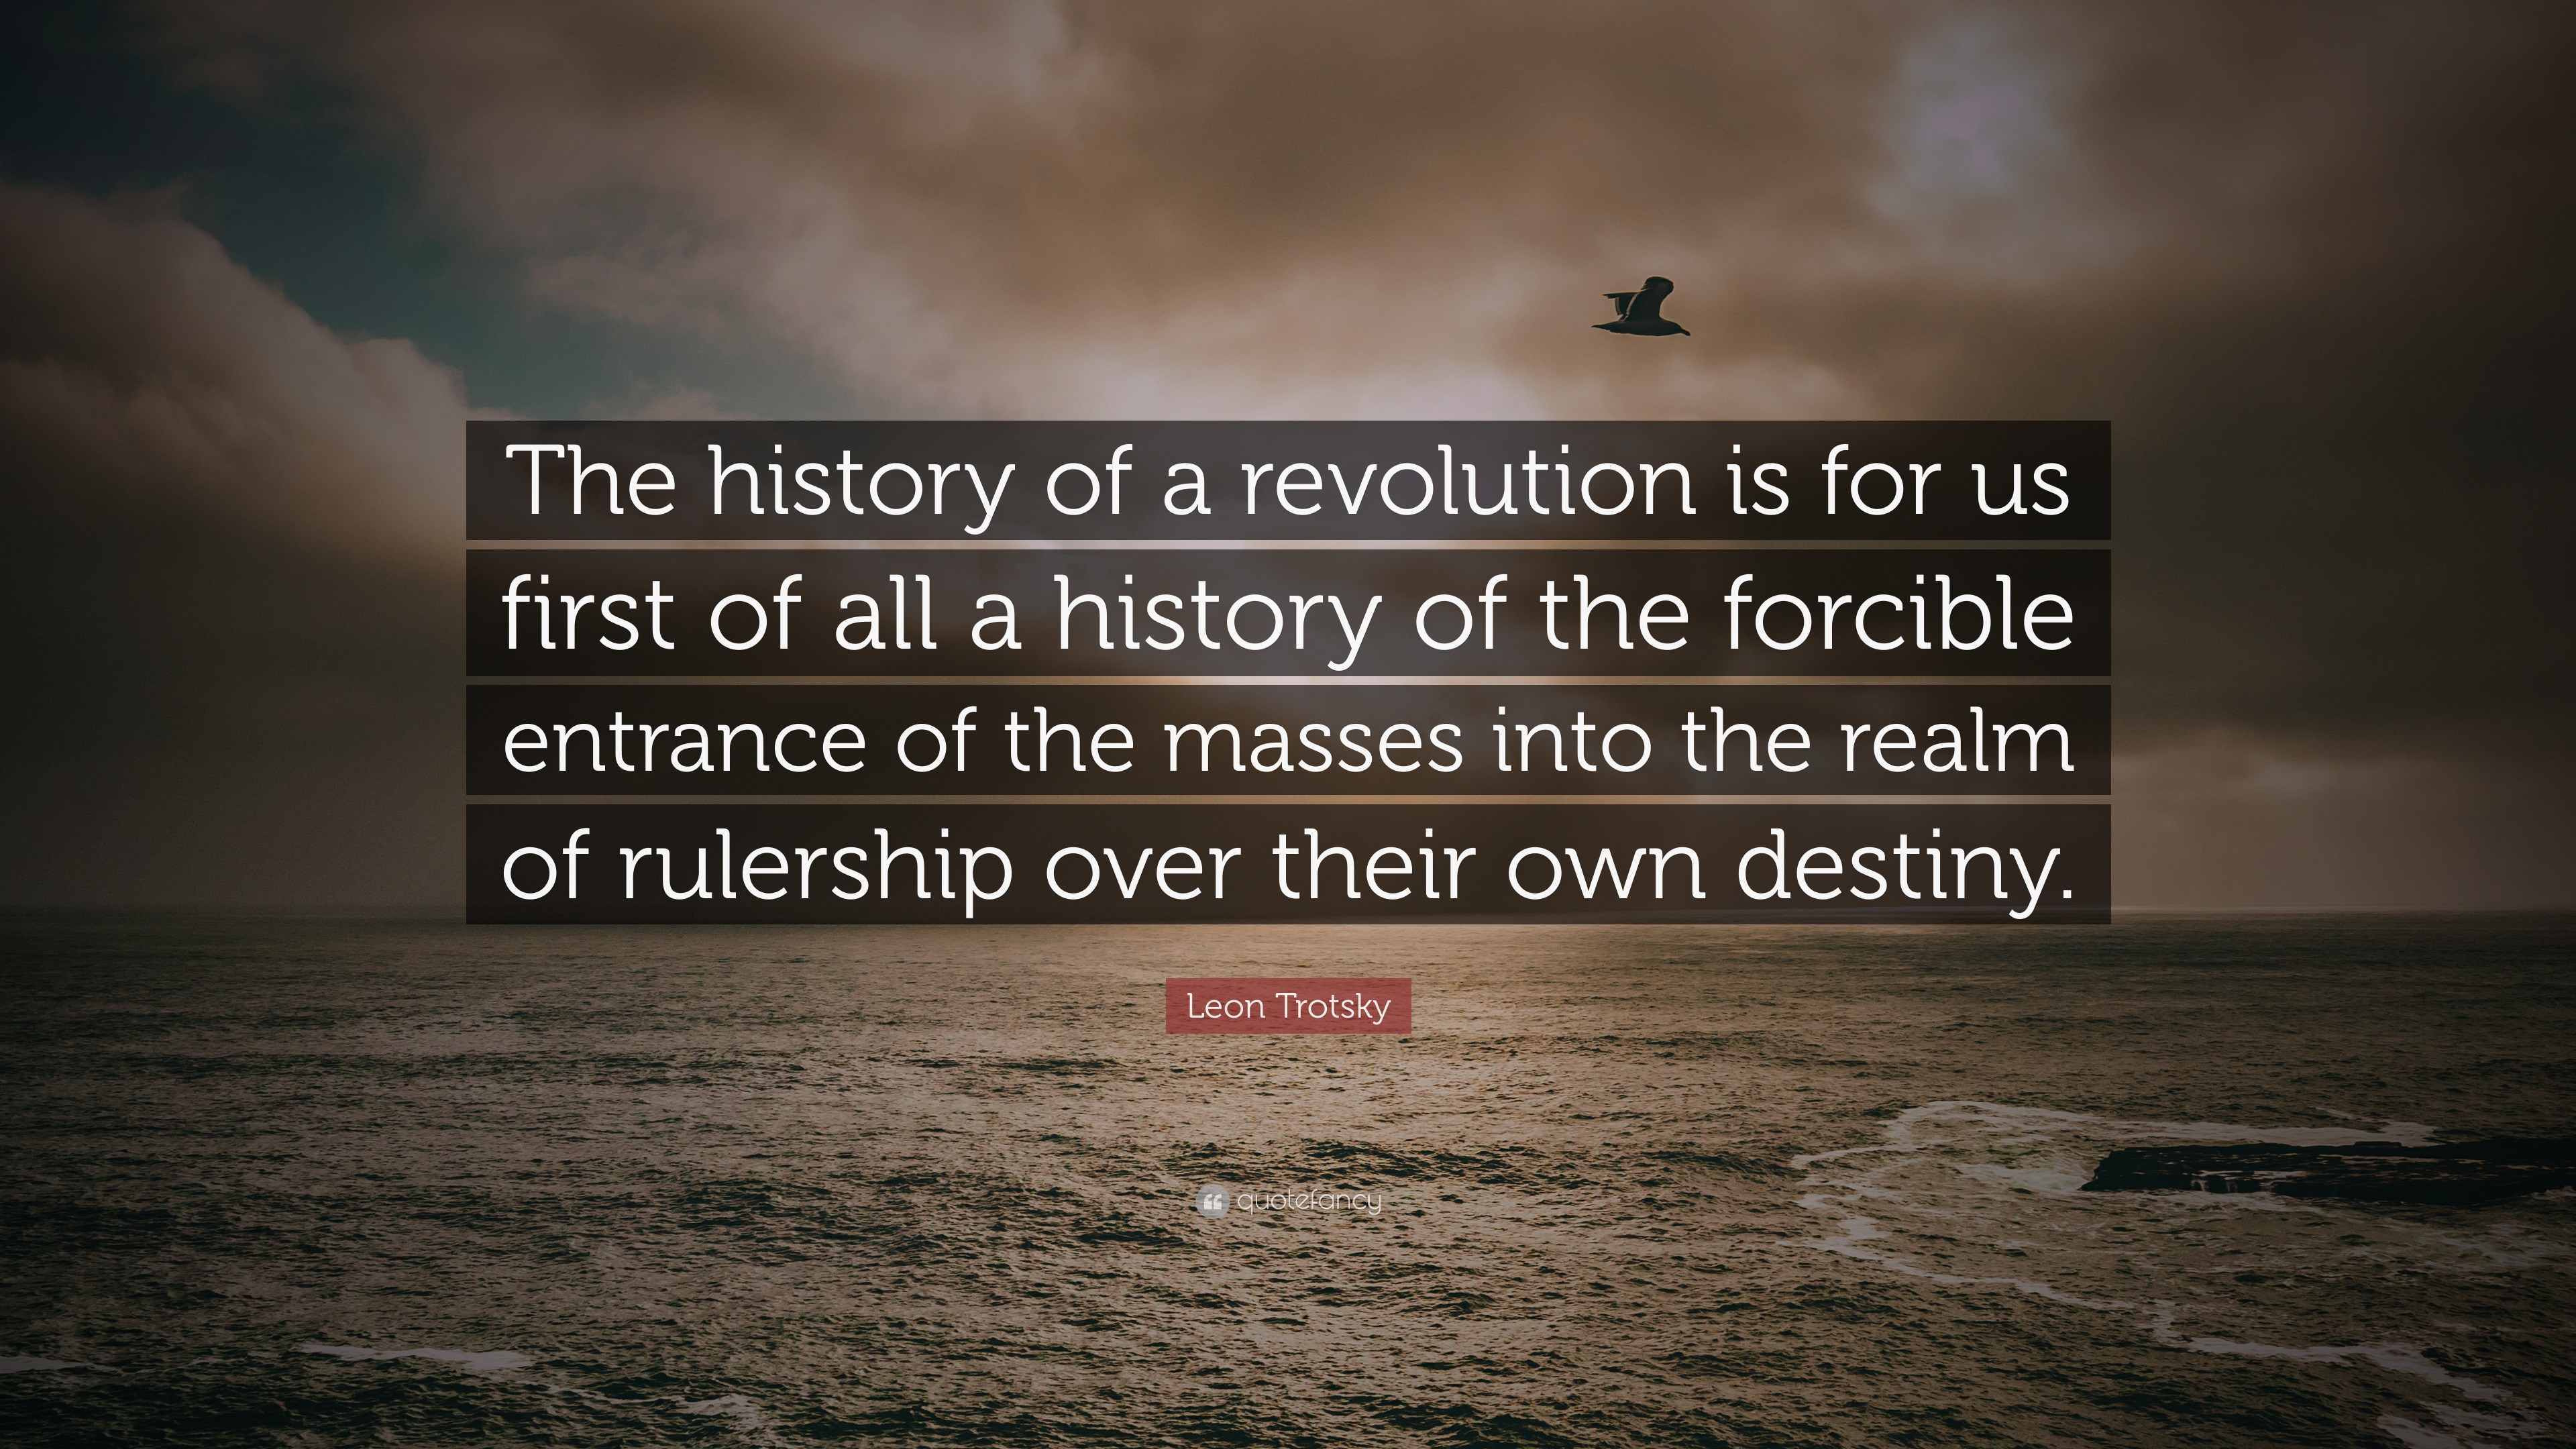 Leon Trotsky Quote: “The history of a revolution is for us first of all ...